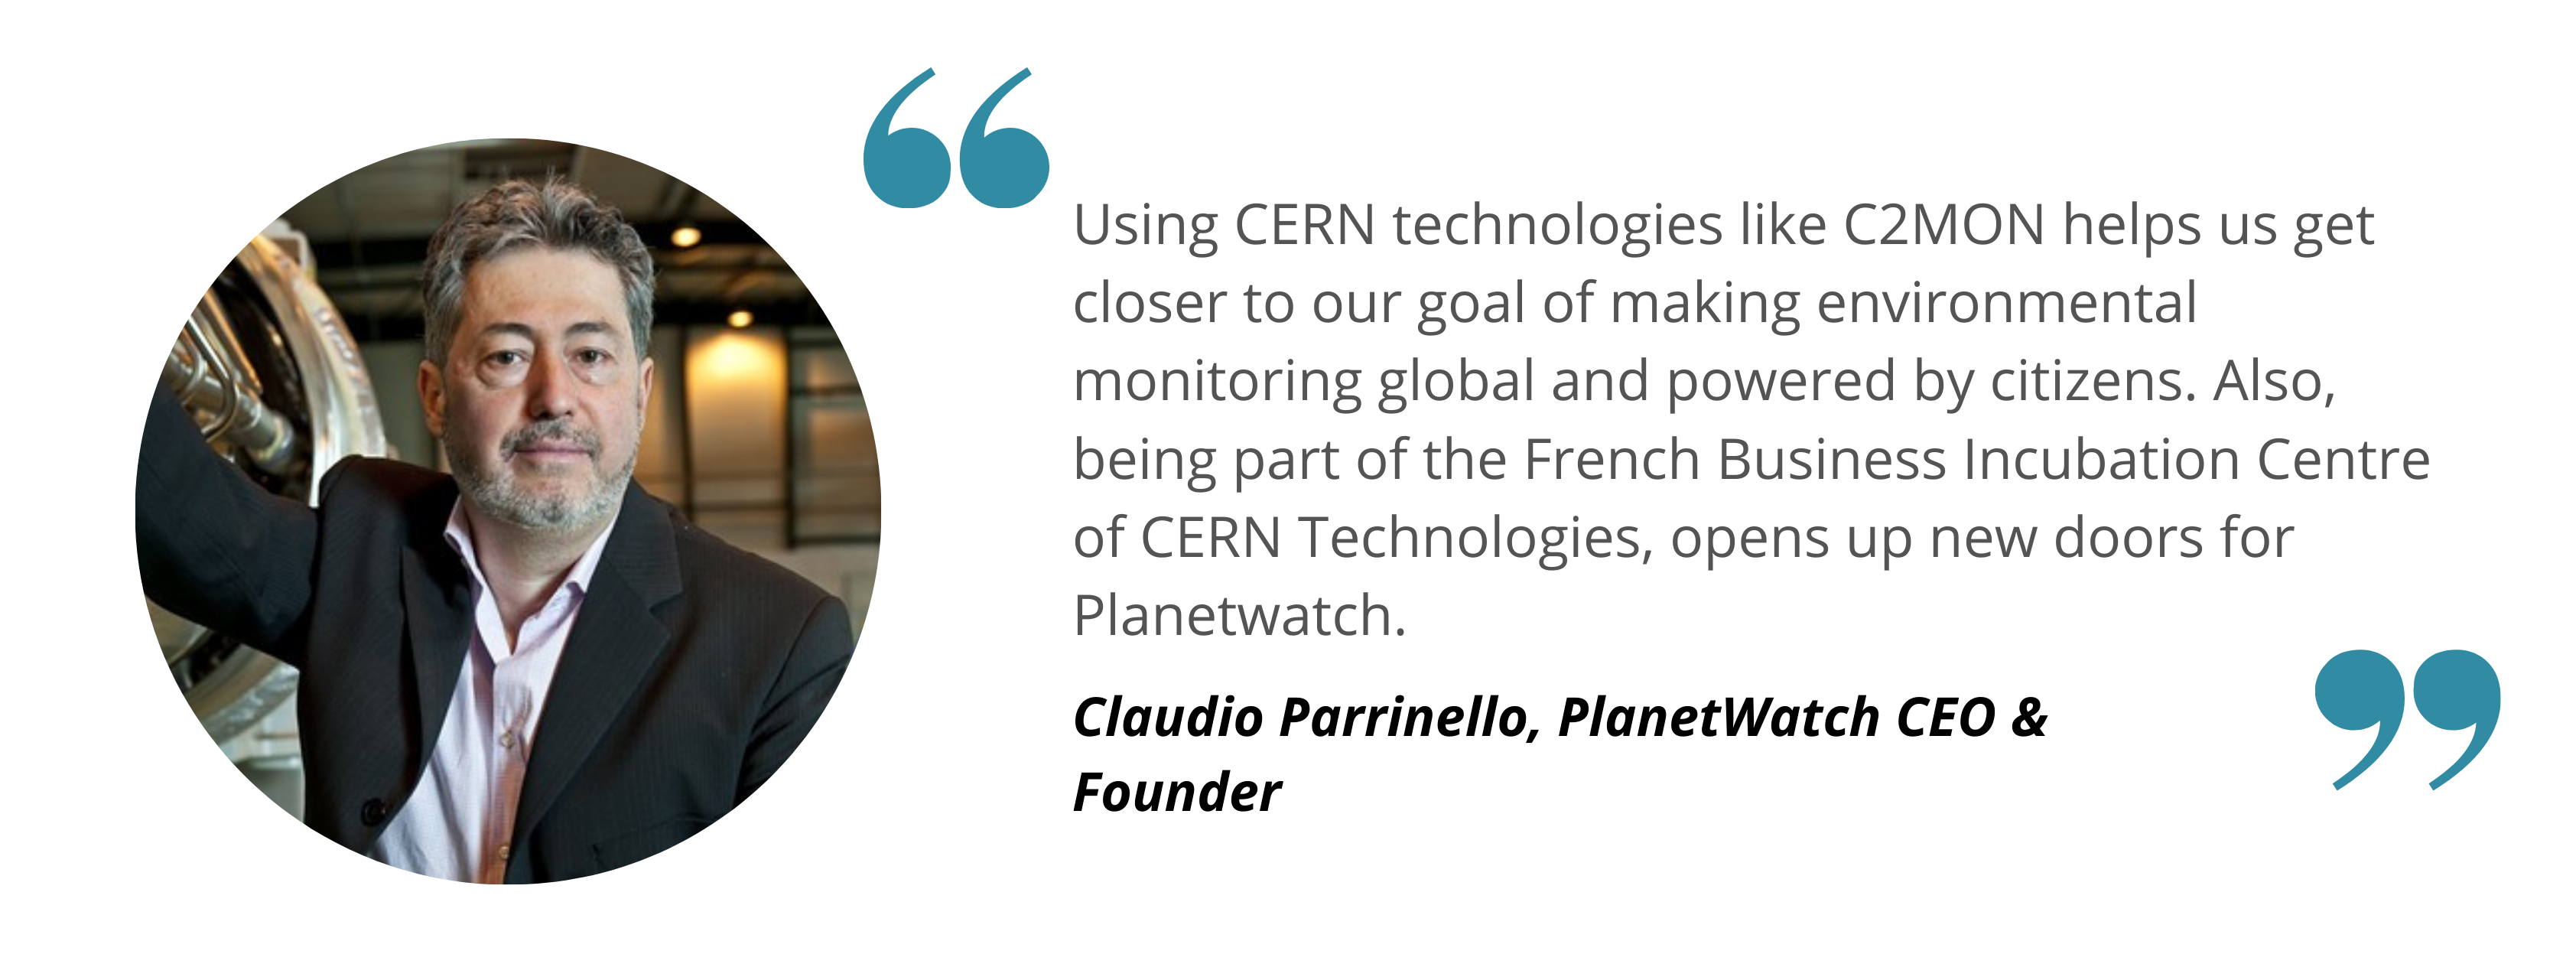 Claudio Planetwatch- Using CERN technologies like C2MON helps us get closer to our goal of making environmental monitoring global and powered by citizens. Also, being part of the French Business Incubation Centre of CERN Technologies, opens up new doors for Planetwatch.